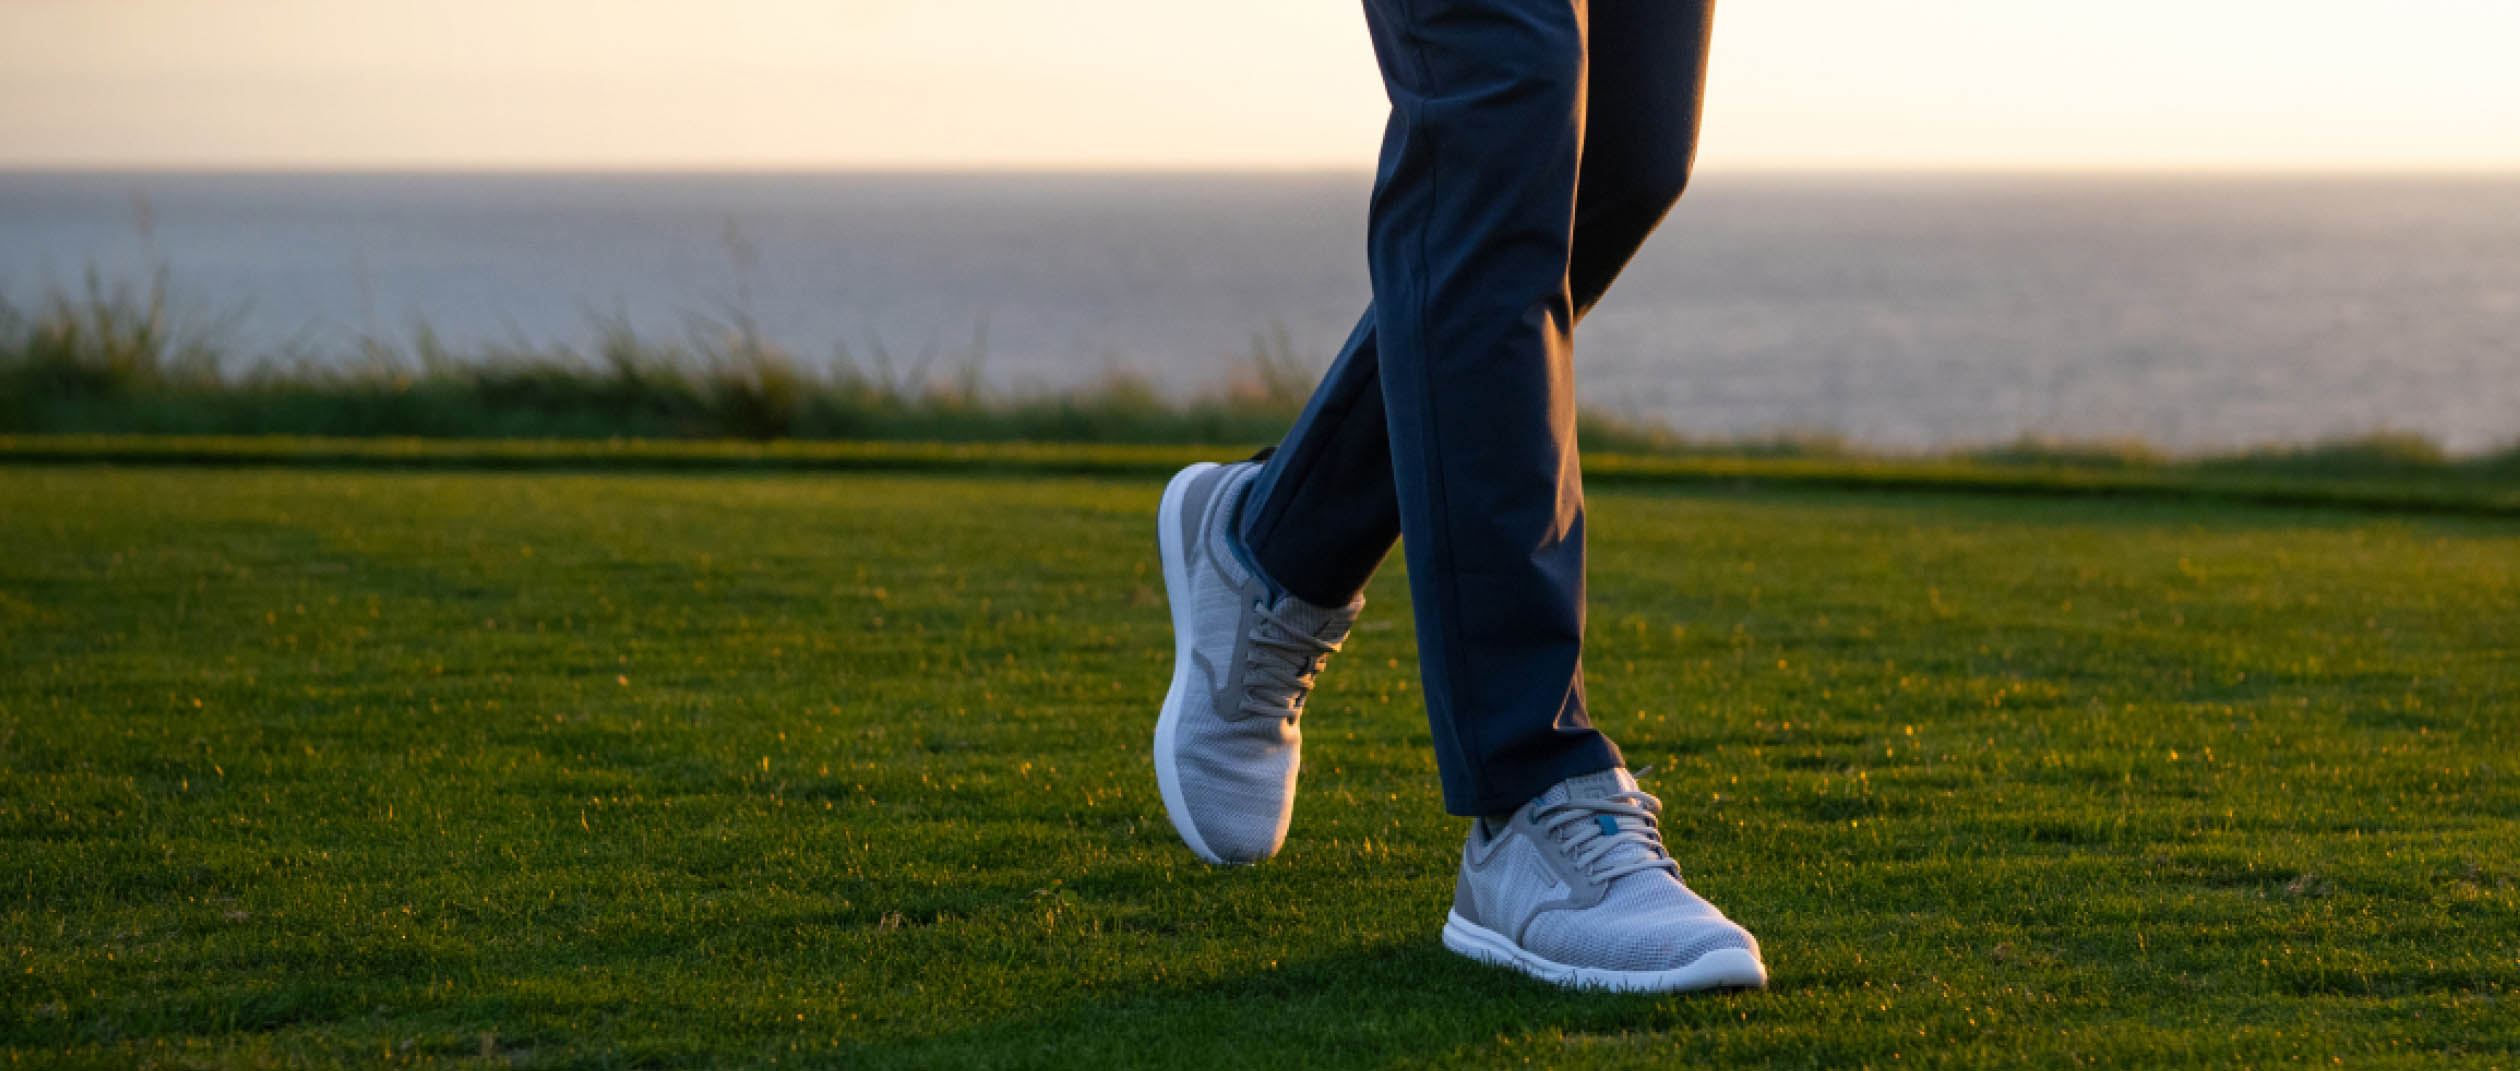 Men's Golf Pants: Elevate your Style & Performance